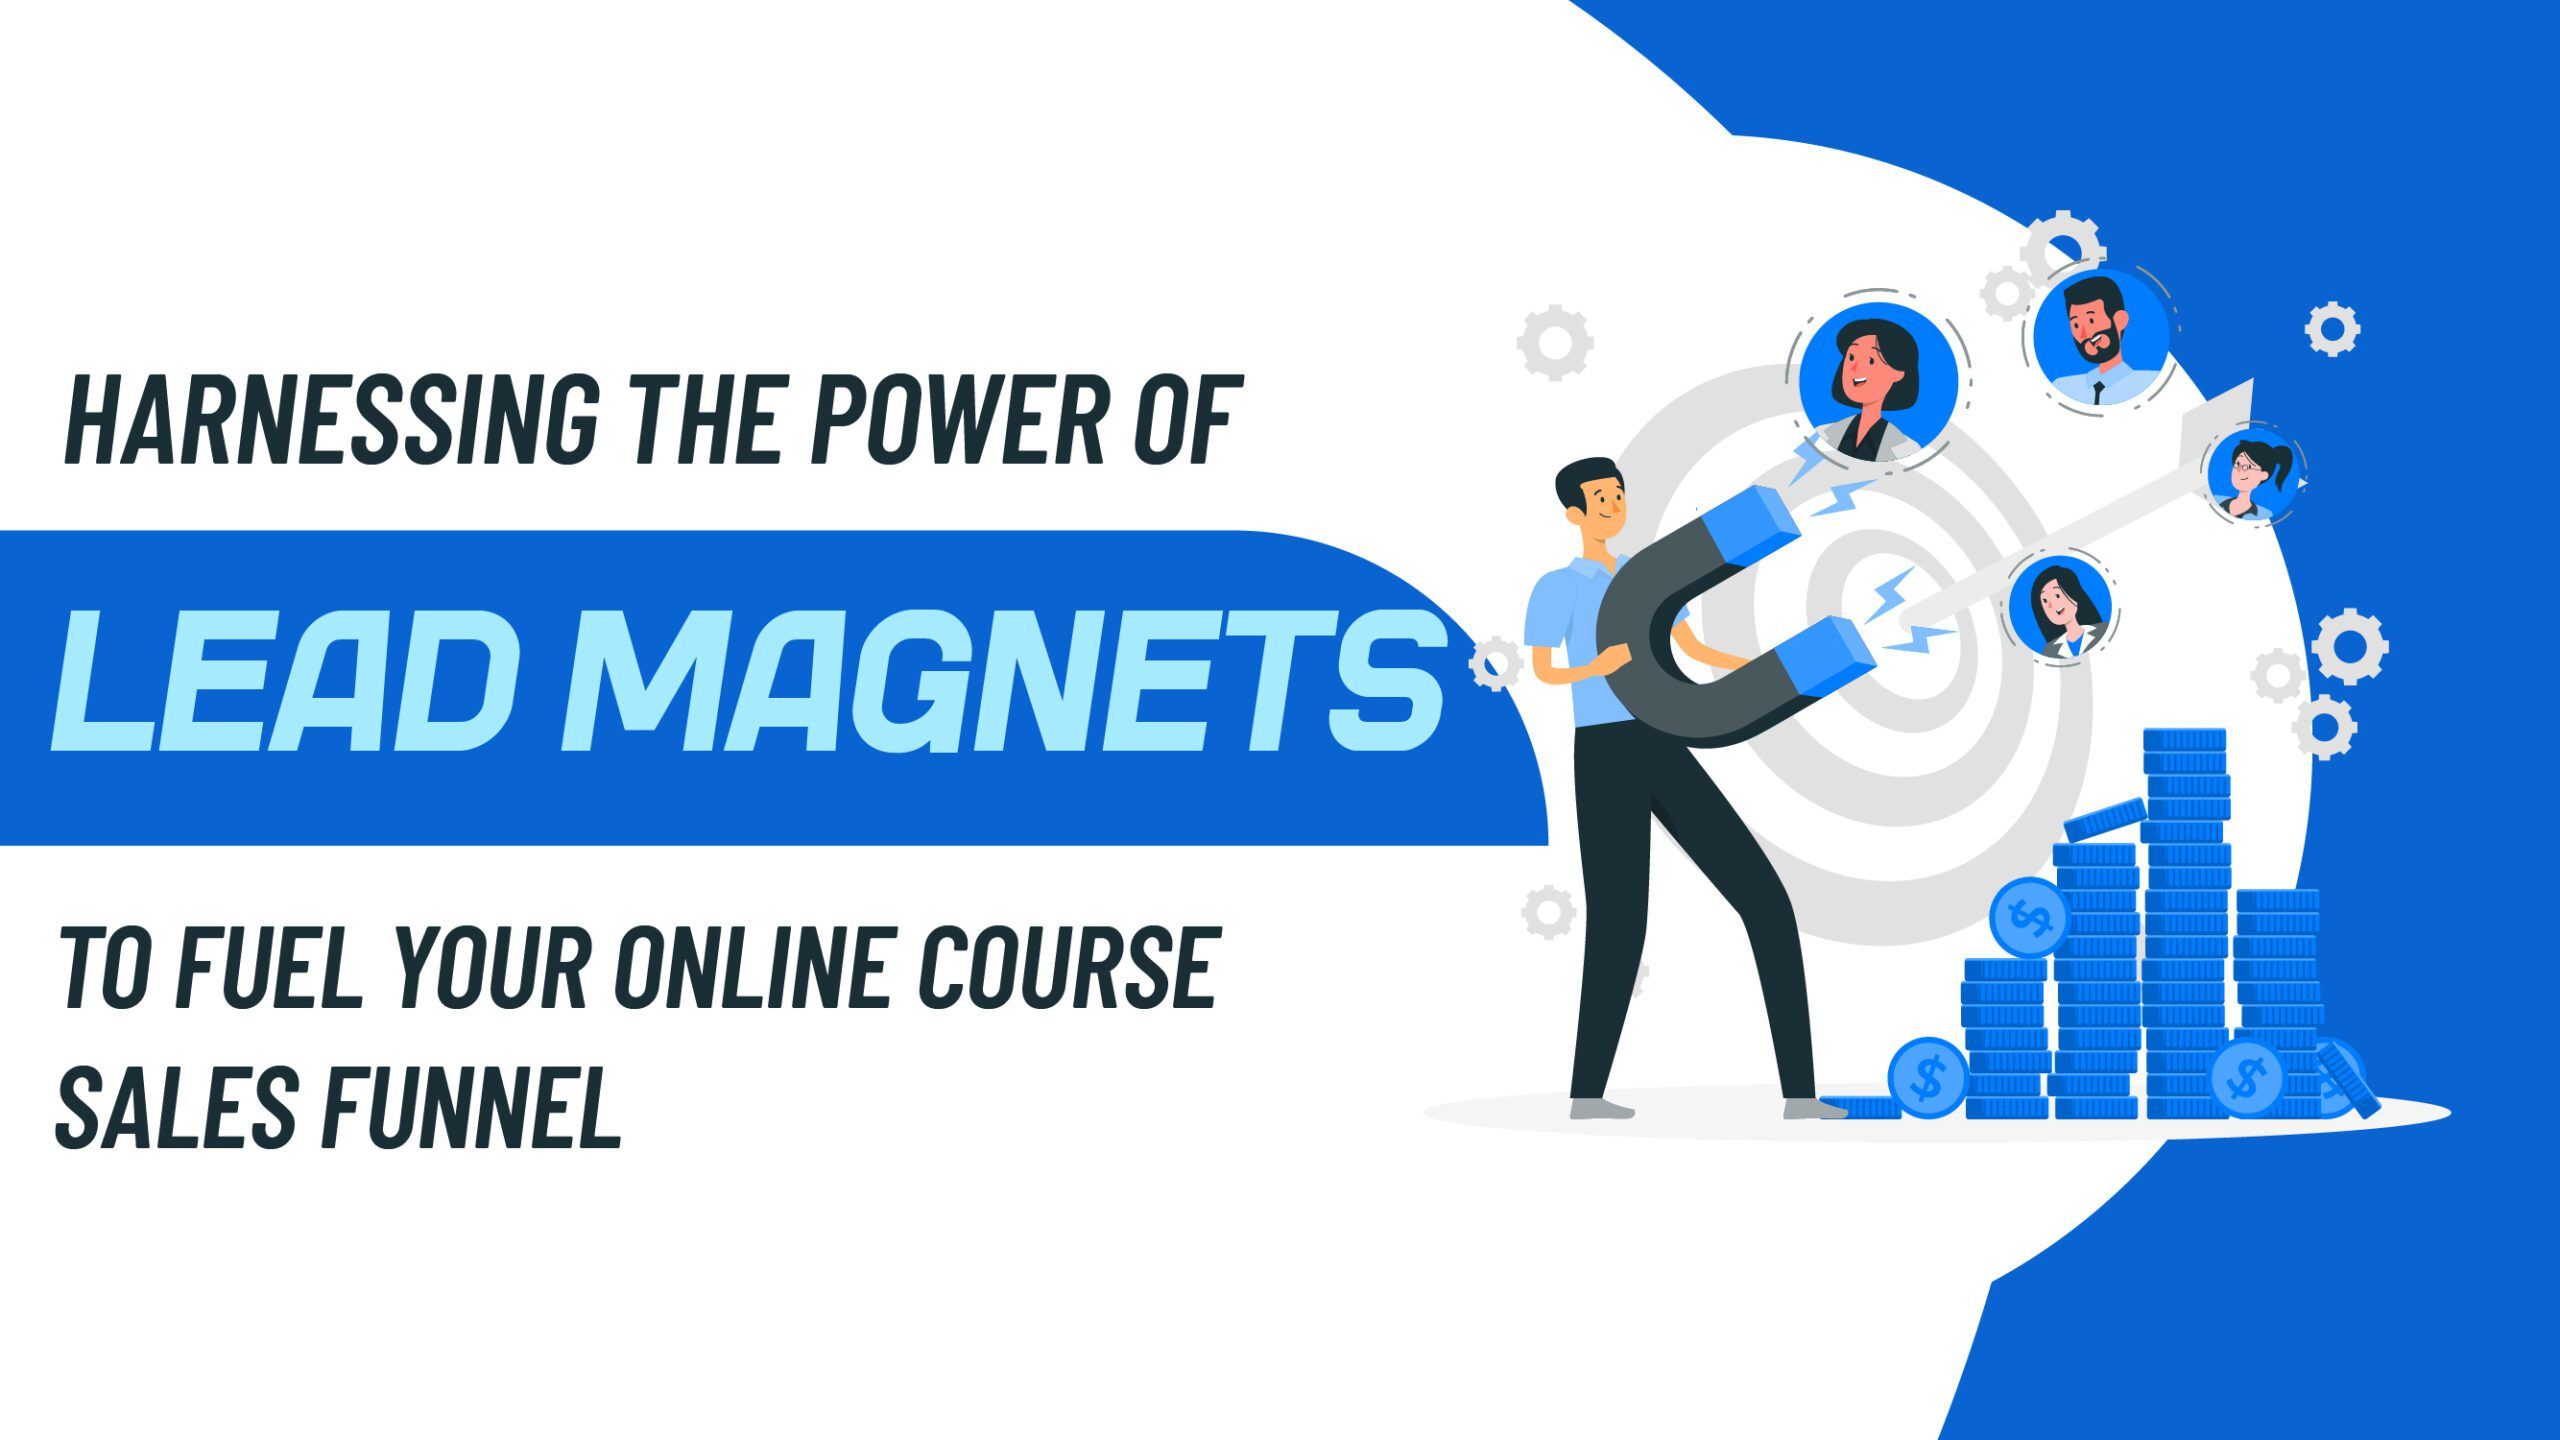 Harnessing the Power of Lead Magnets to Fuel Your Online Course Sales Funnel